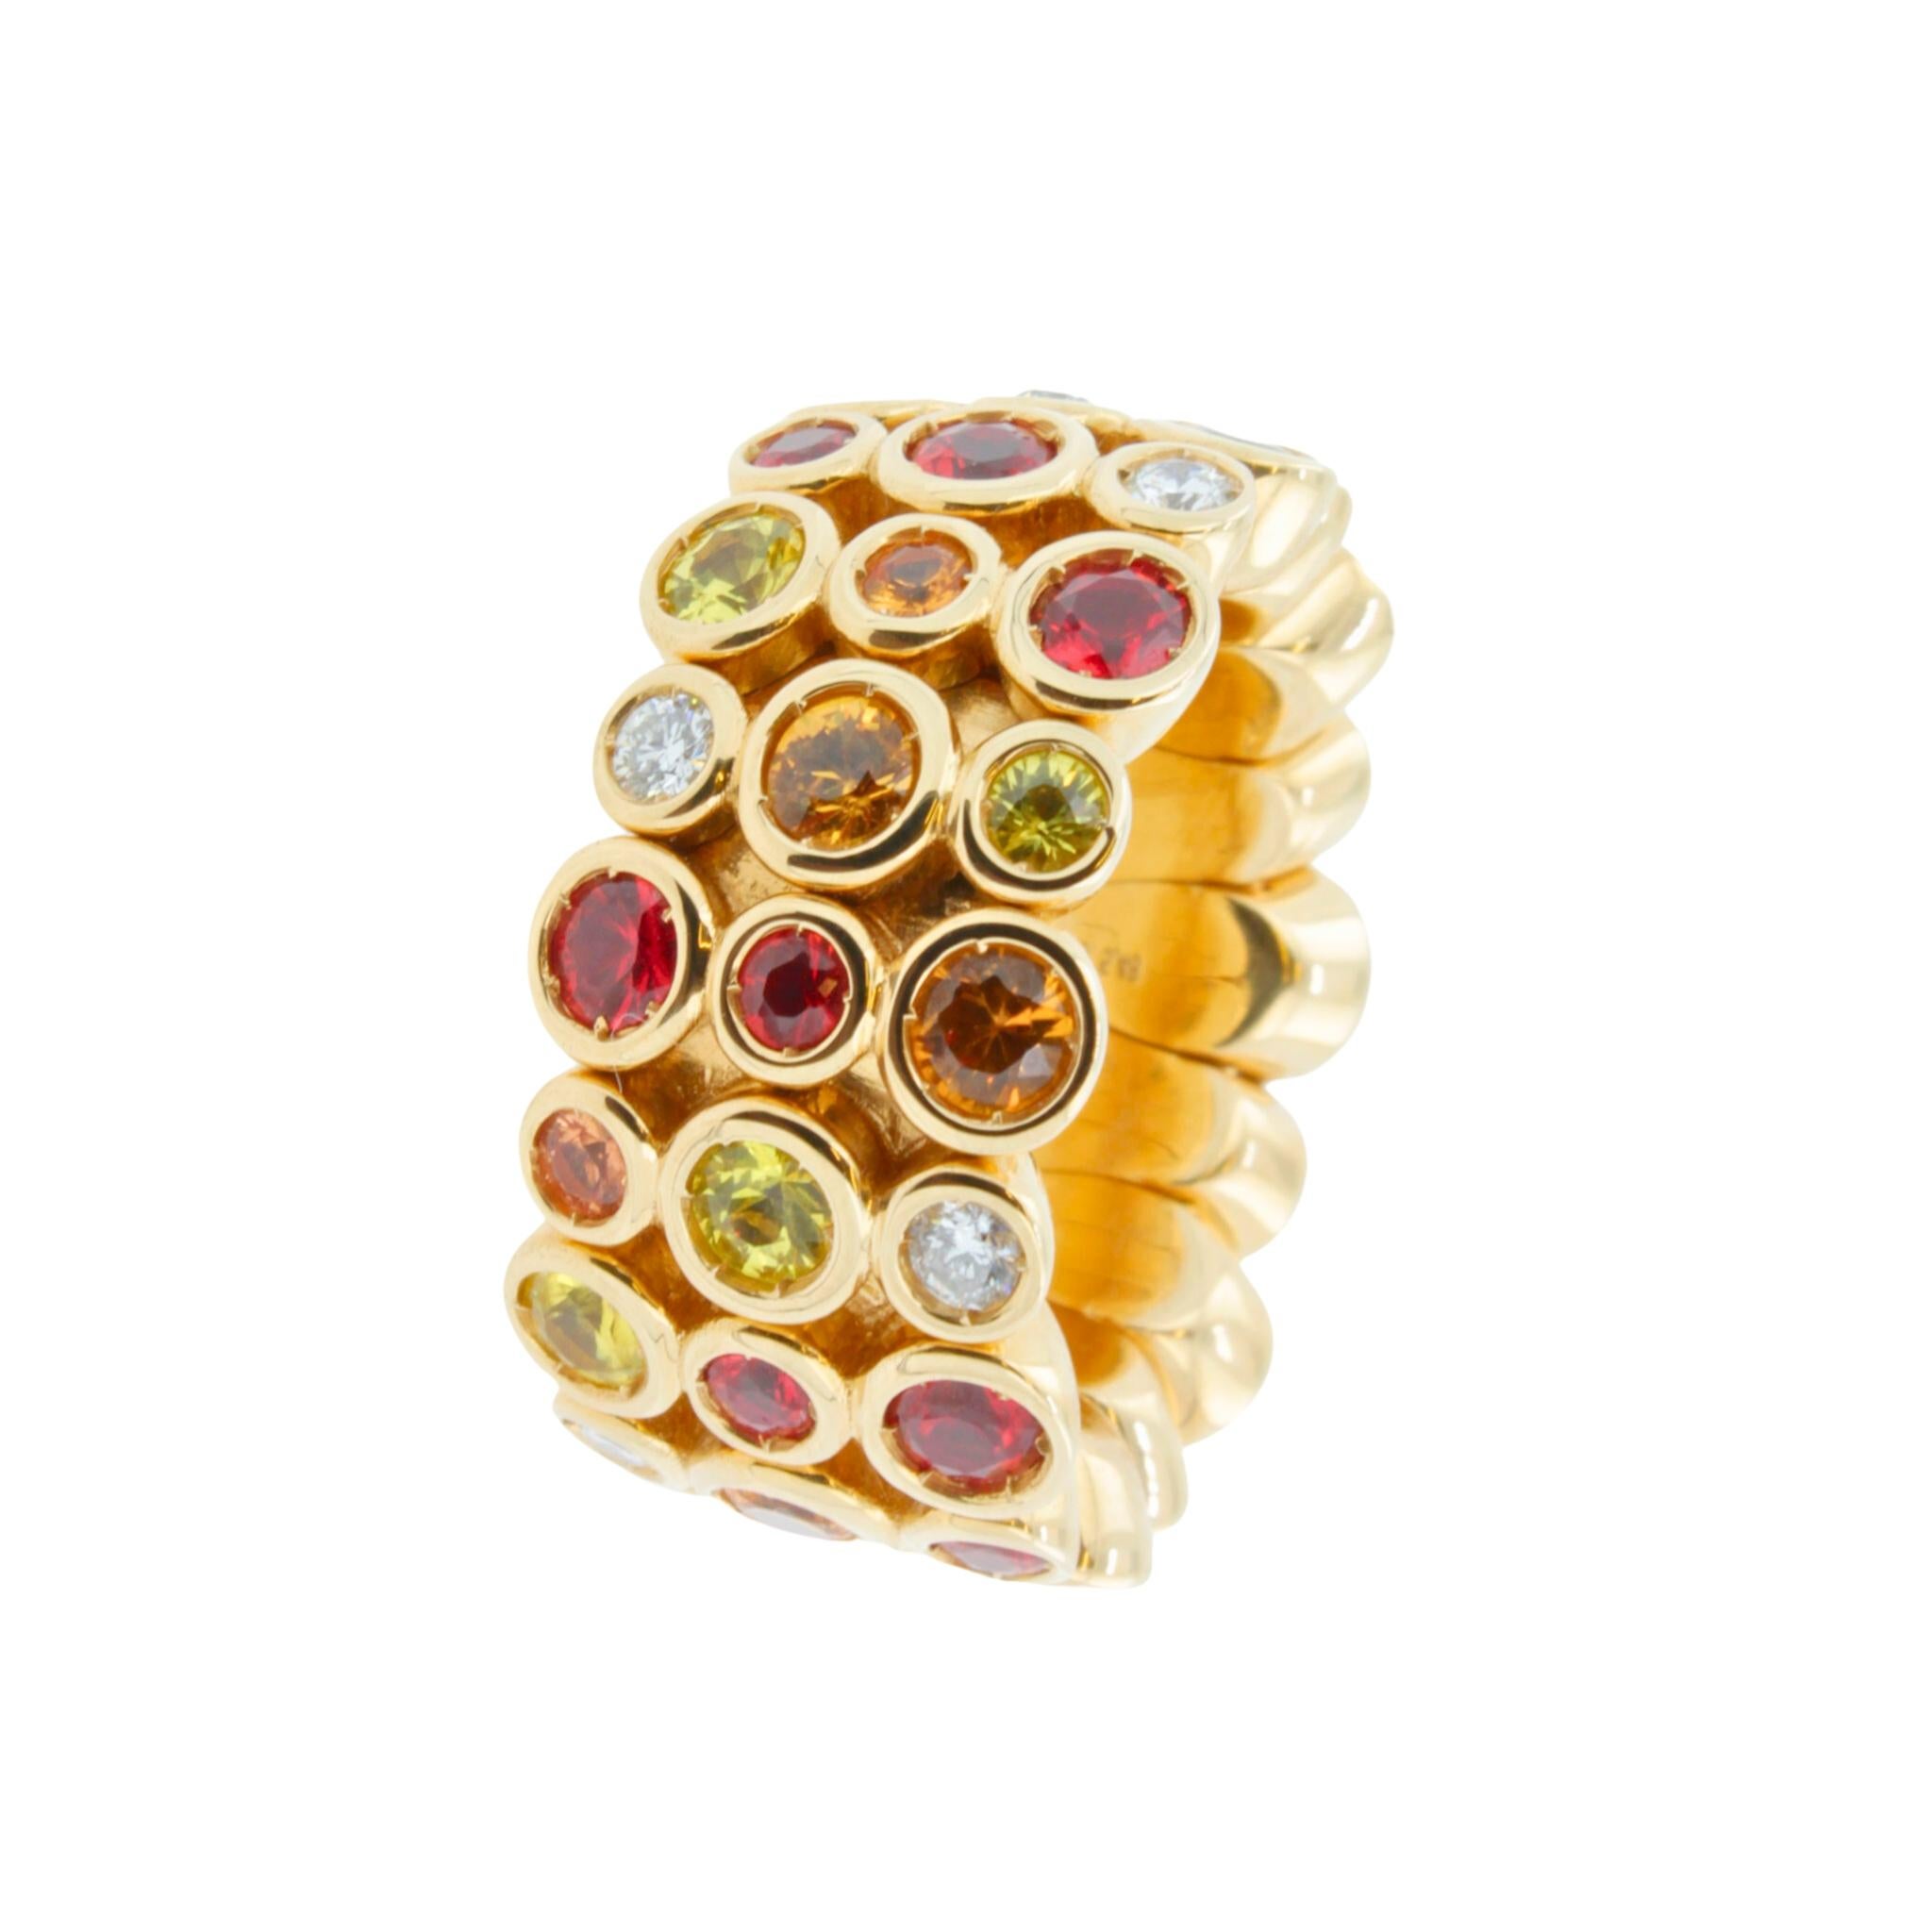 Modern Round Sapphires, Rubies & Diamonds Ring Set in 18K Yellow Gold For Sale 3